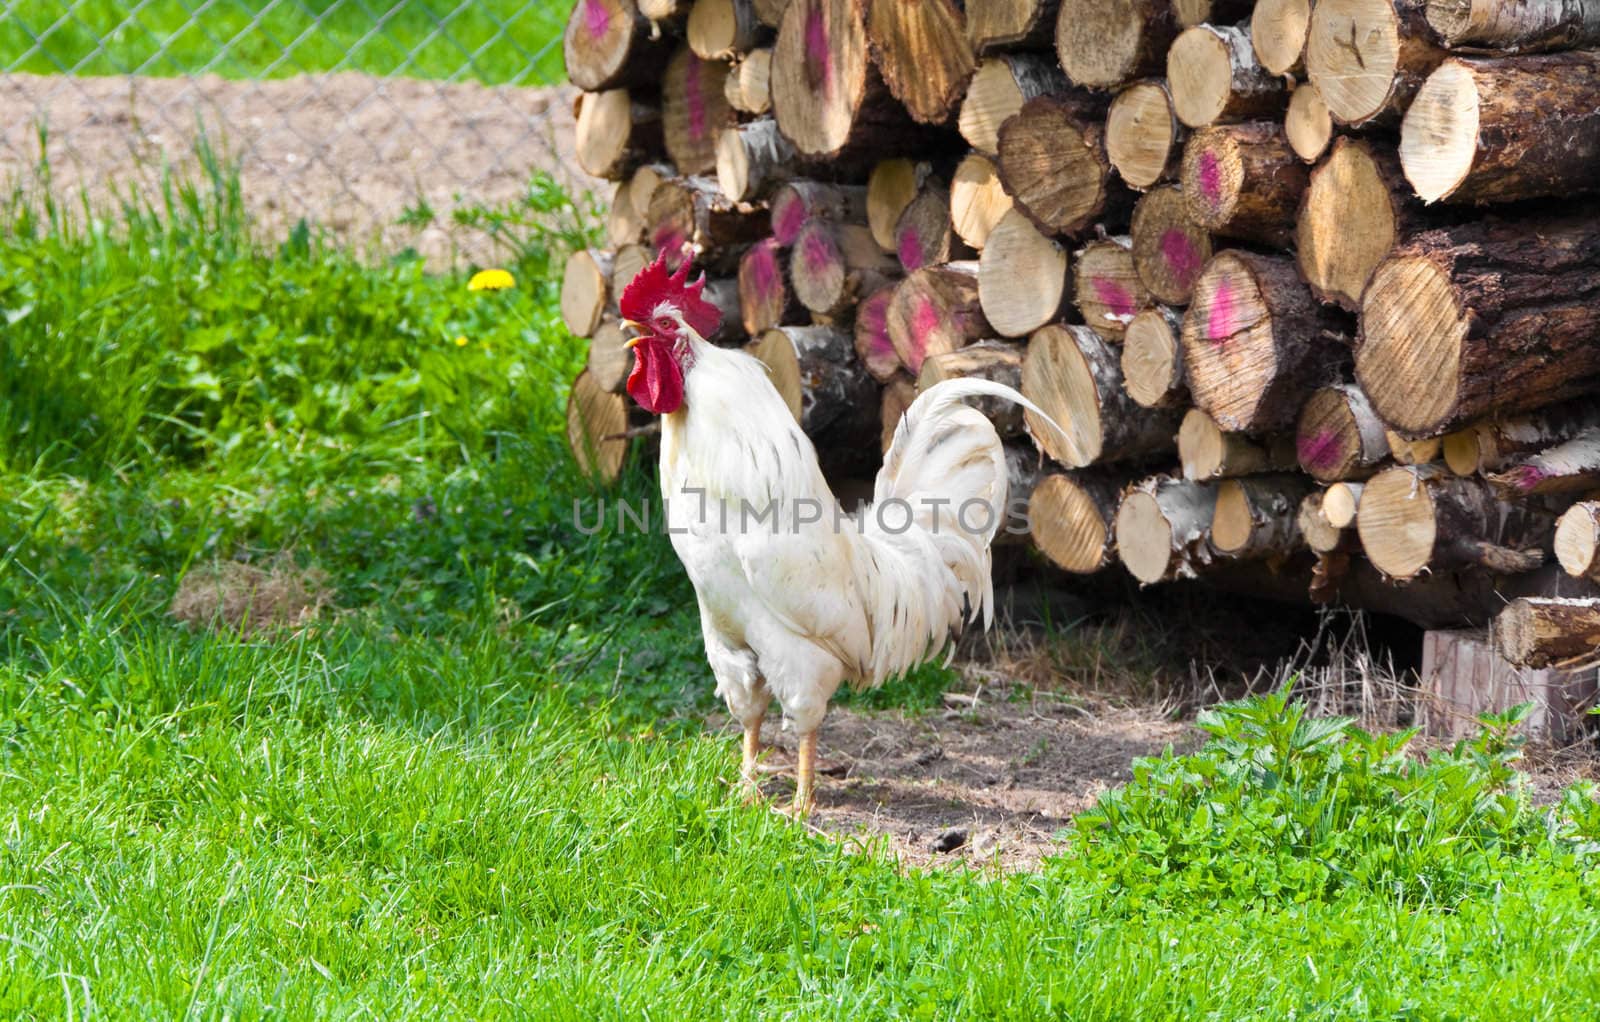 This image shows a white cock